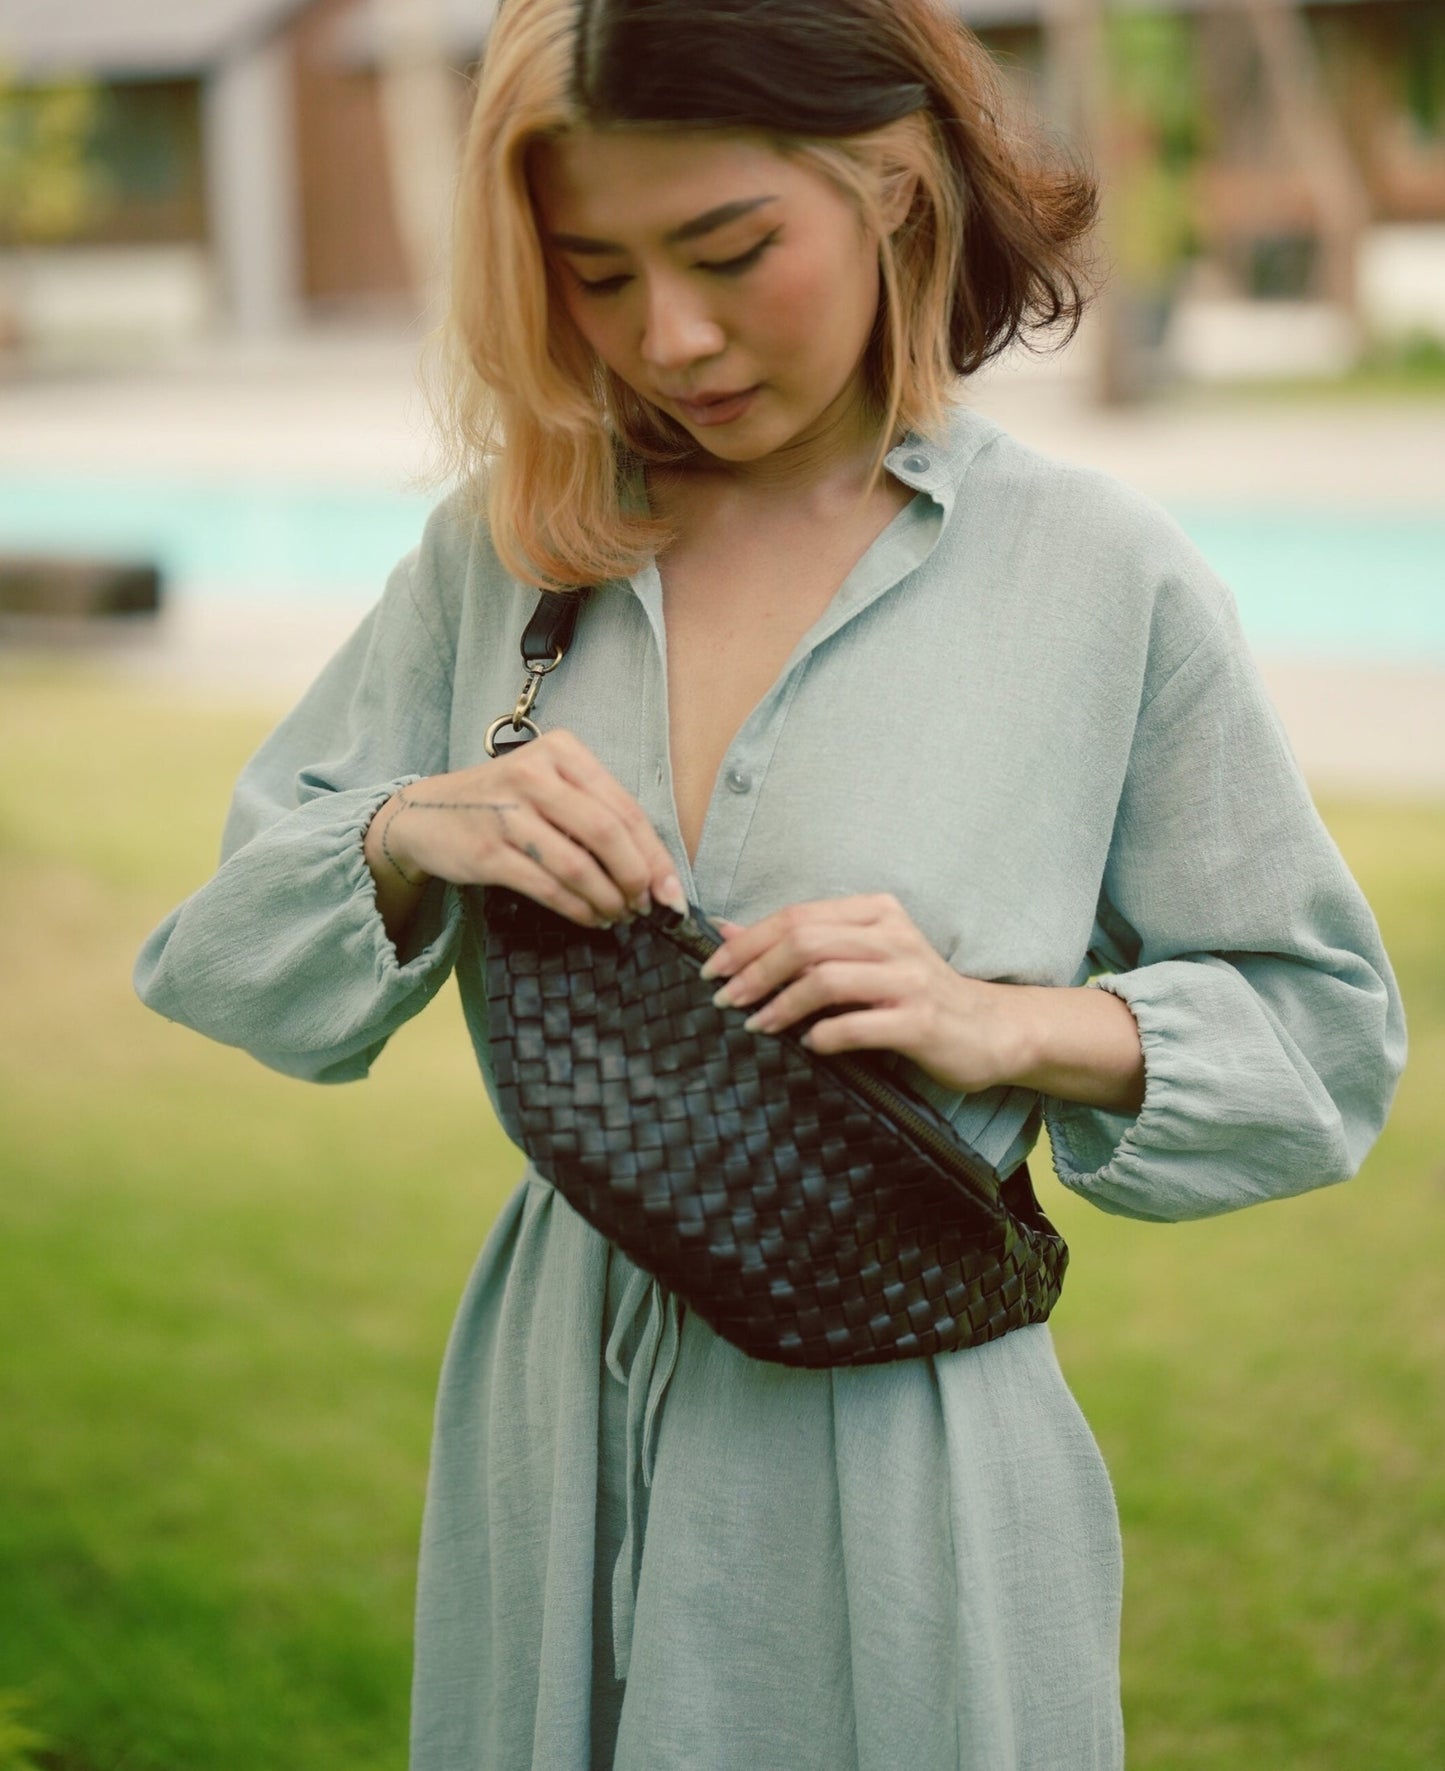 Makayla Handwoven Leather Fanny Pack